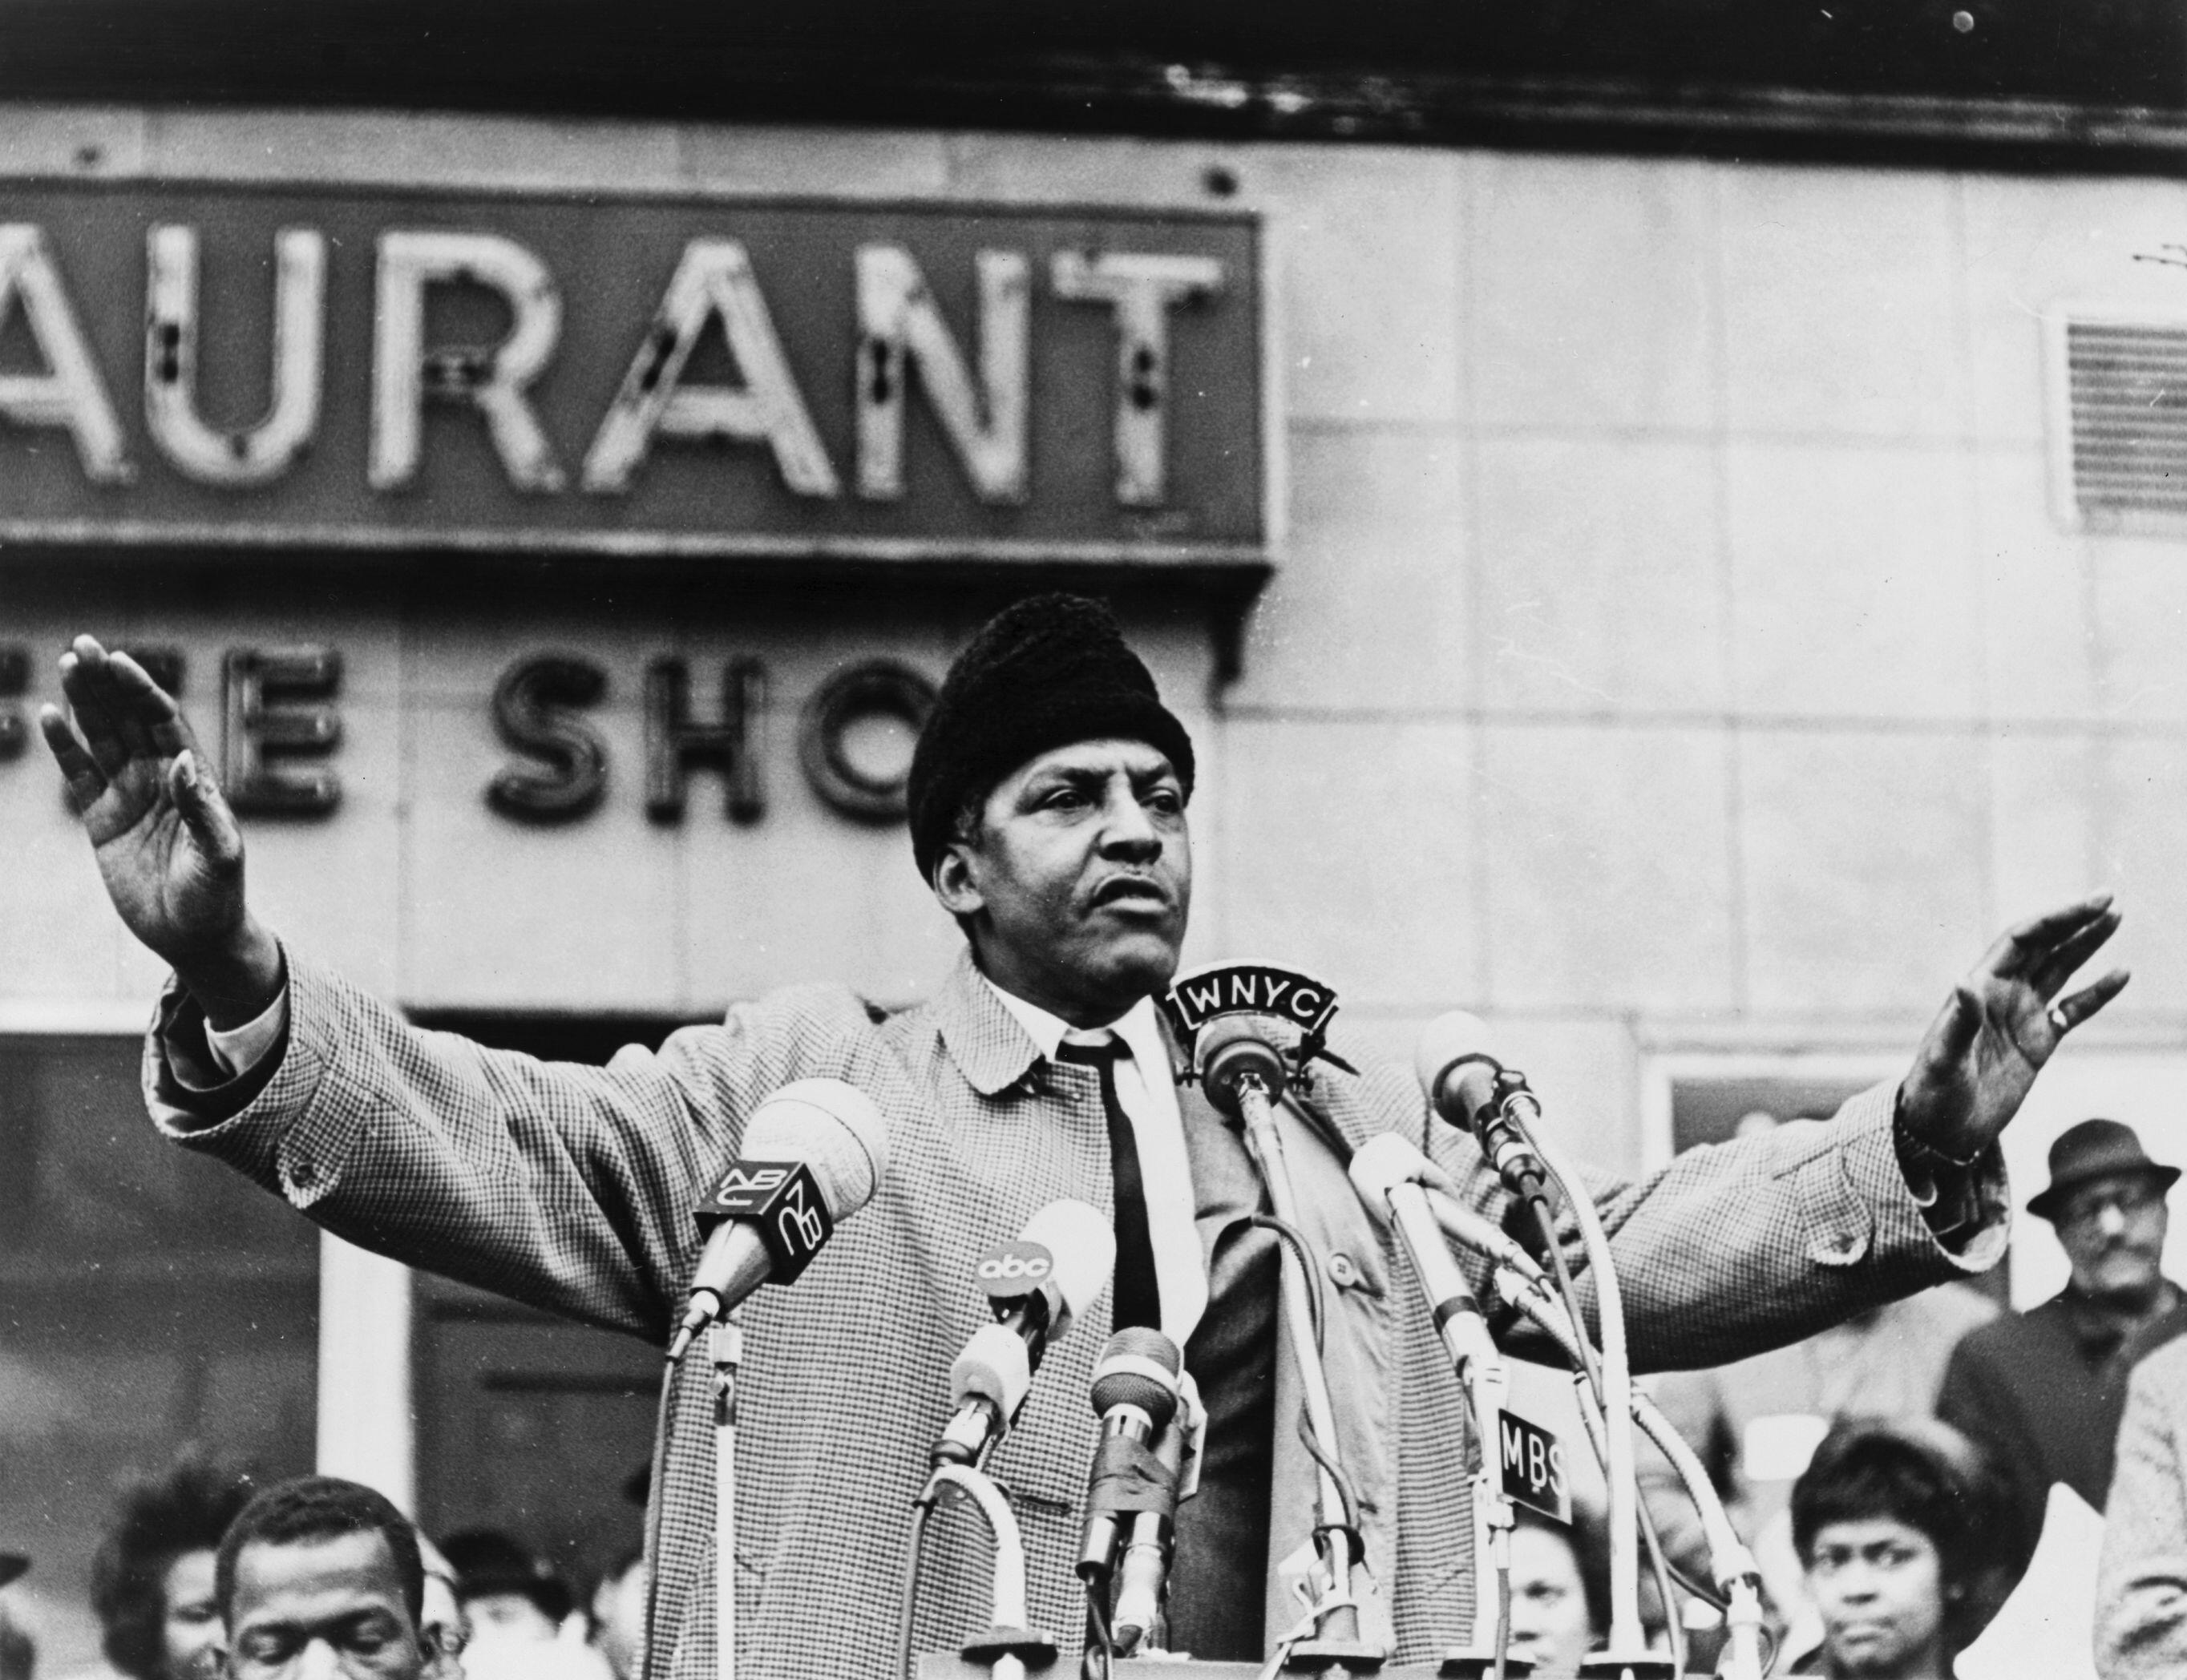 Bayard Rustin stands before microphones at a podium with arms outstretched